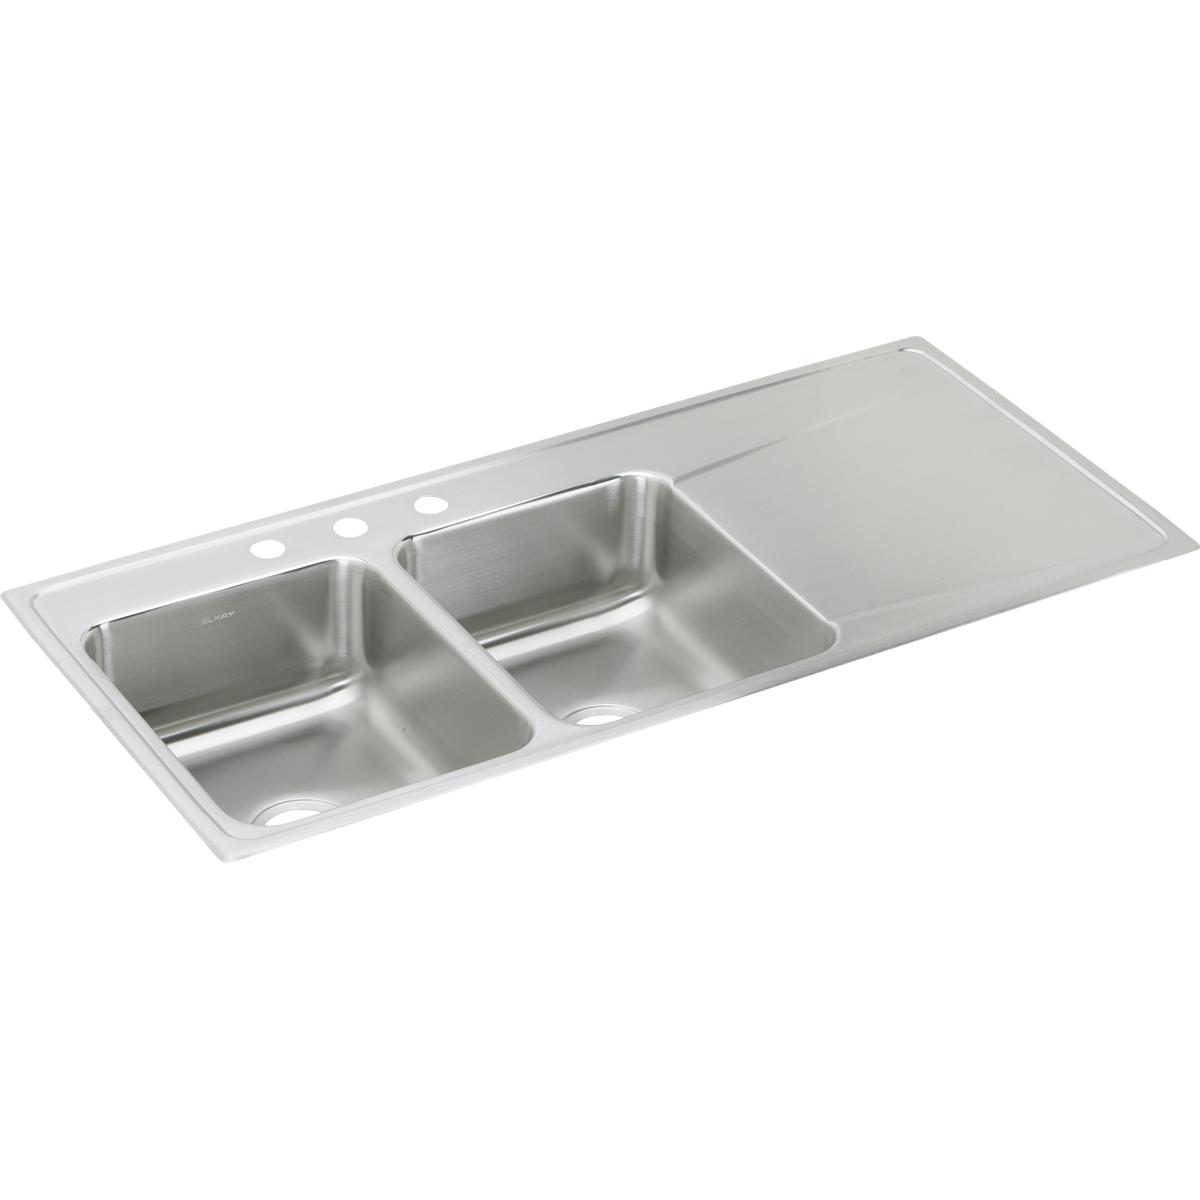 Elkay Lustertone Classic 48" x 22" x 7-5/8" Stainless Steel Equal Double Bowl Drop-in Sink with Drainboard